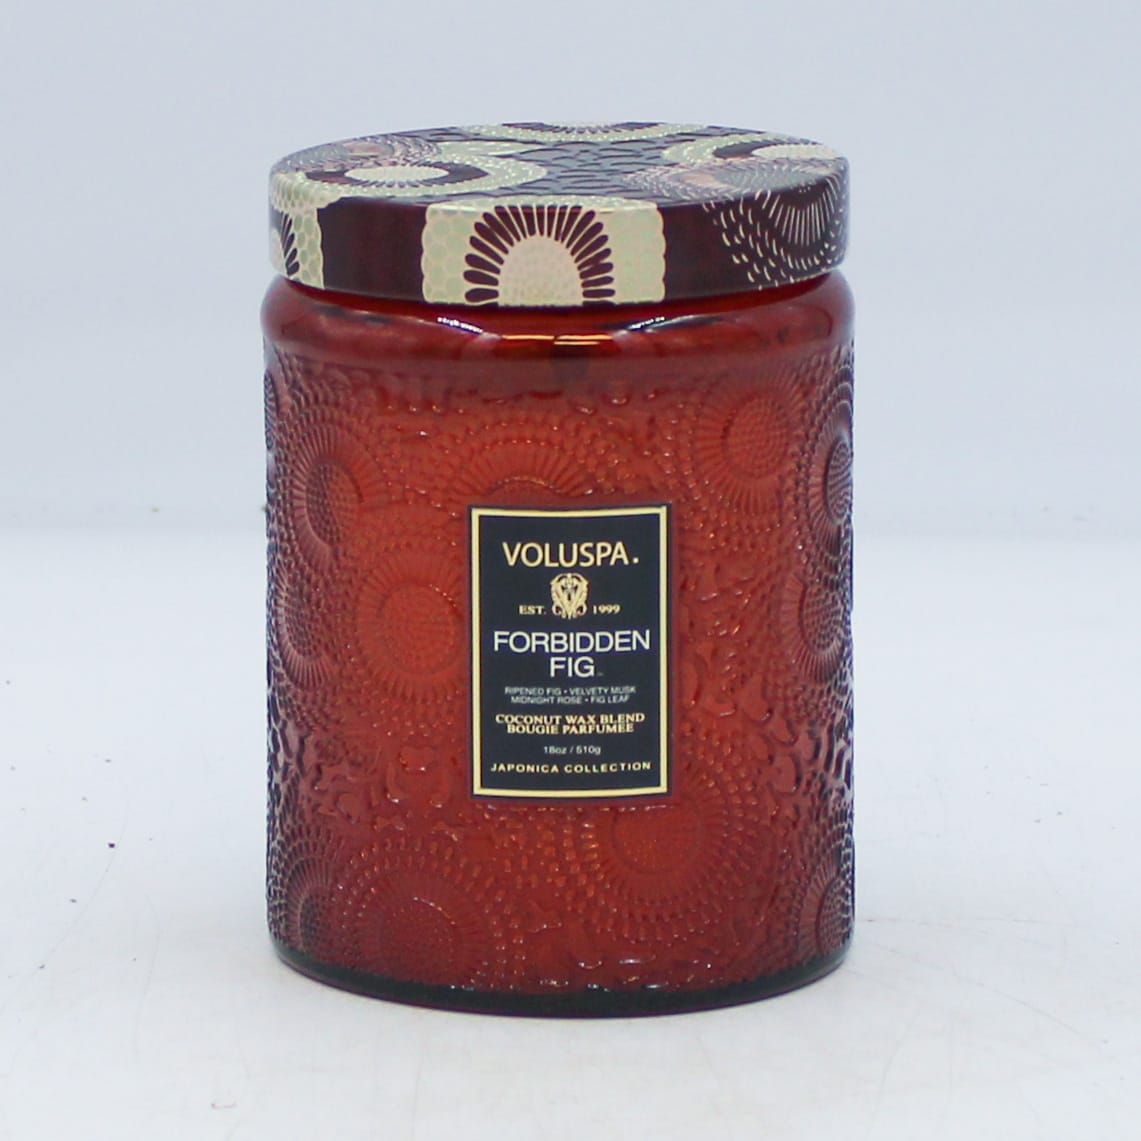 VOLUSPA Forbidden Fig  - DESCRIPTION  Notes of Ripened Fig, Velvety Musk, Midnight Rose &amp; Fig Leaf. Fragrance Description Unearth the pure magnificence of the wild fig tree. Rooted down in the dry sun-drenched soil, smooth white bark unfolds with fragrant facets of lush green leaves. This matriarch of the orchard is crowned with succulent dark fruits, filled with coveted sweet nectar and armed with sophisticated woody stalks. The rustling wind sweeps up the essence of plump wild berries and fallen crushed leaves, leaving you with an aromatic fragrance so sweet and alluring that it earns its name - Forbidden Fig.